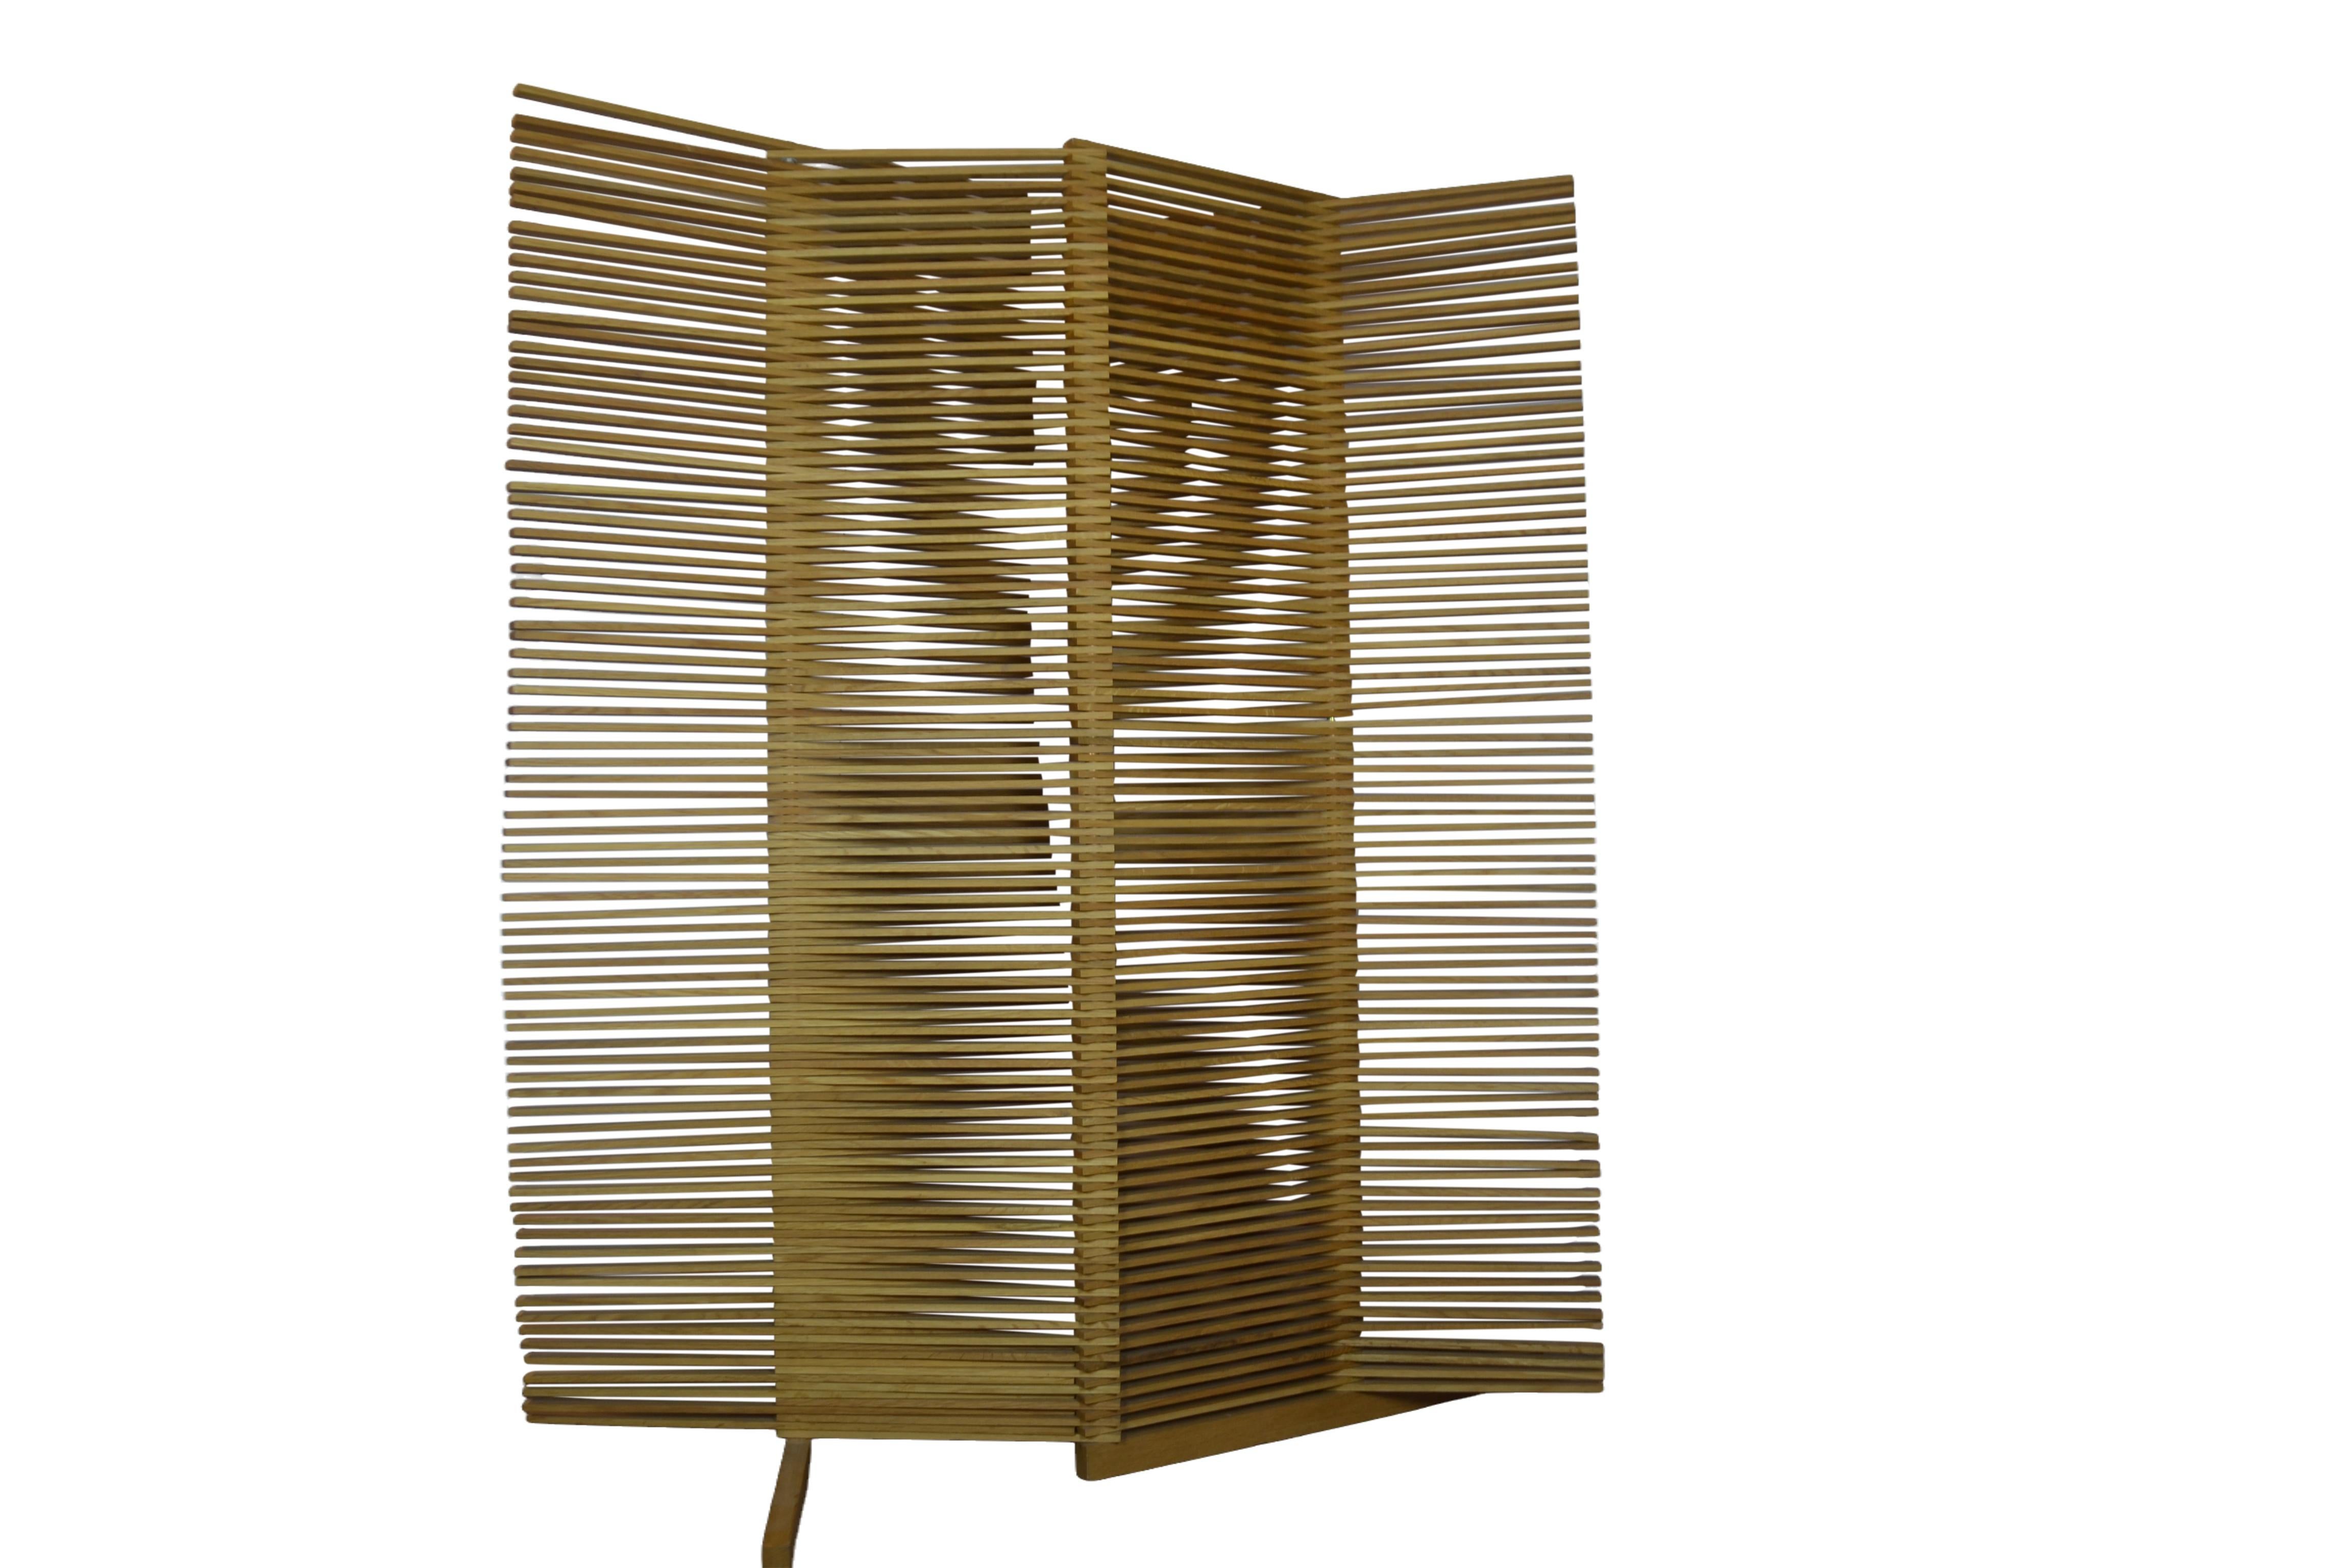 Mid-century style room divider made with wood. 
The wooden slats can be styled straight or curved.